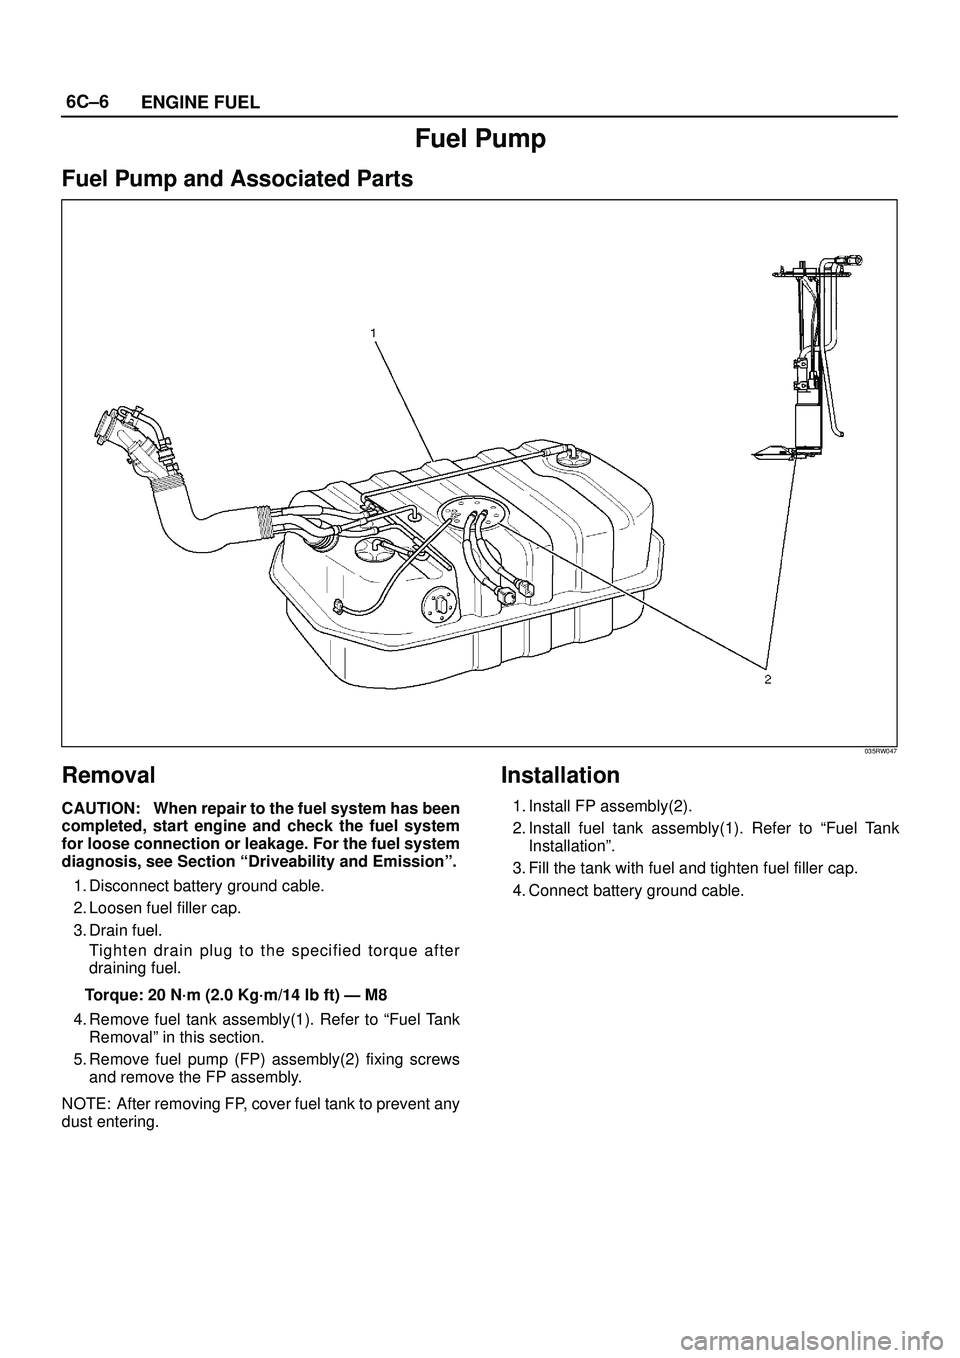 ISUZU TROOPER 1998  Service Repair Manual 6C±6
ENGINE FUEL
Fuel Pump
Fuel Pump and Associated Parts
035RW047
Removal
CAUTION: When repair to the fuel system has been
completed, start engine and check the fuel system
for loose connection or l